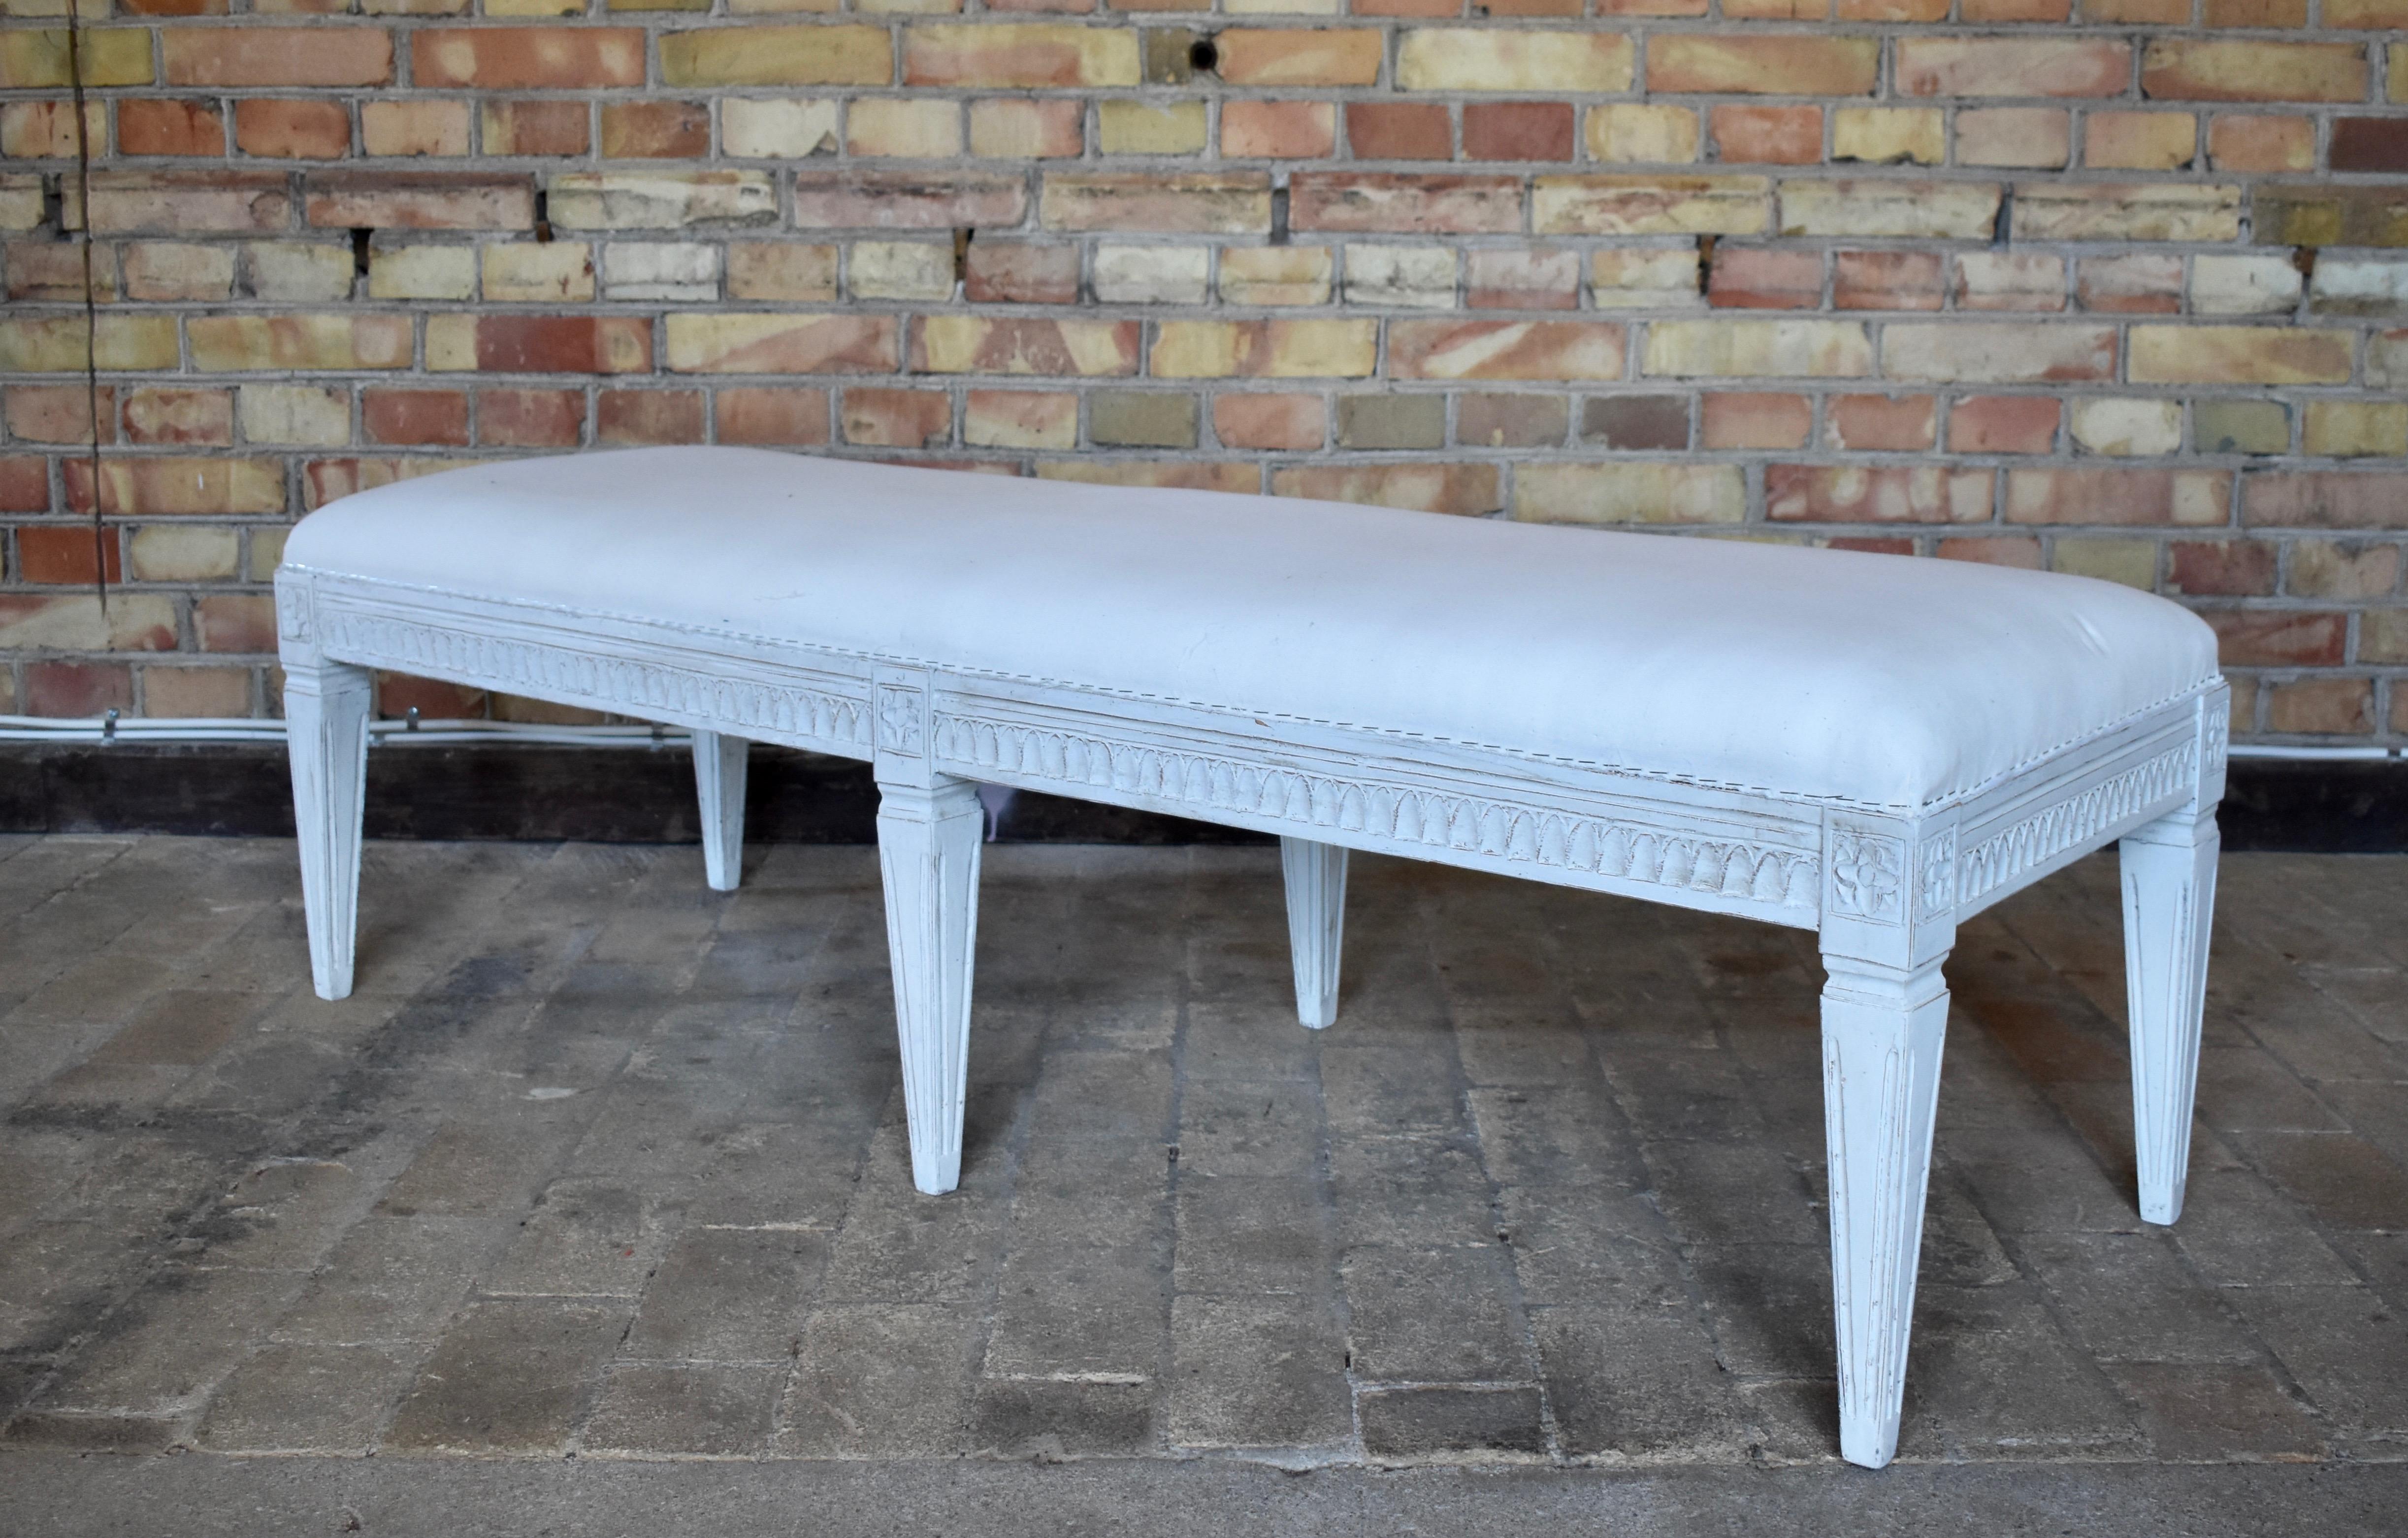 Antique Swedish Gustavian painted bench, with carved lamb's tongue apron, square tapered legs with carved flower rosettes at top of each leg. The bench is painted in a white-greyish color and distressed finish. Renewed upholstery and textile.